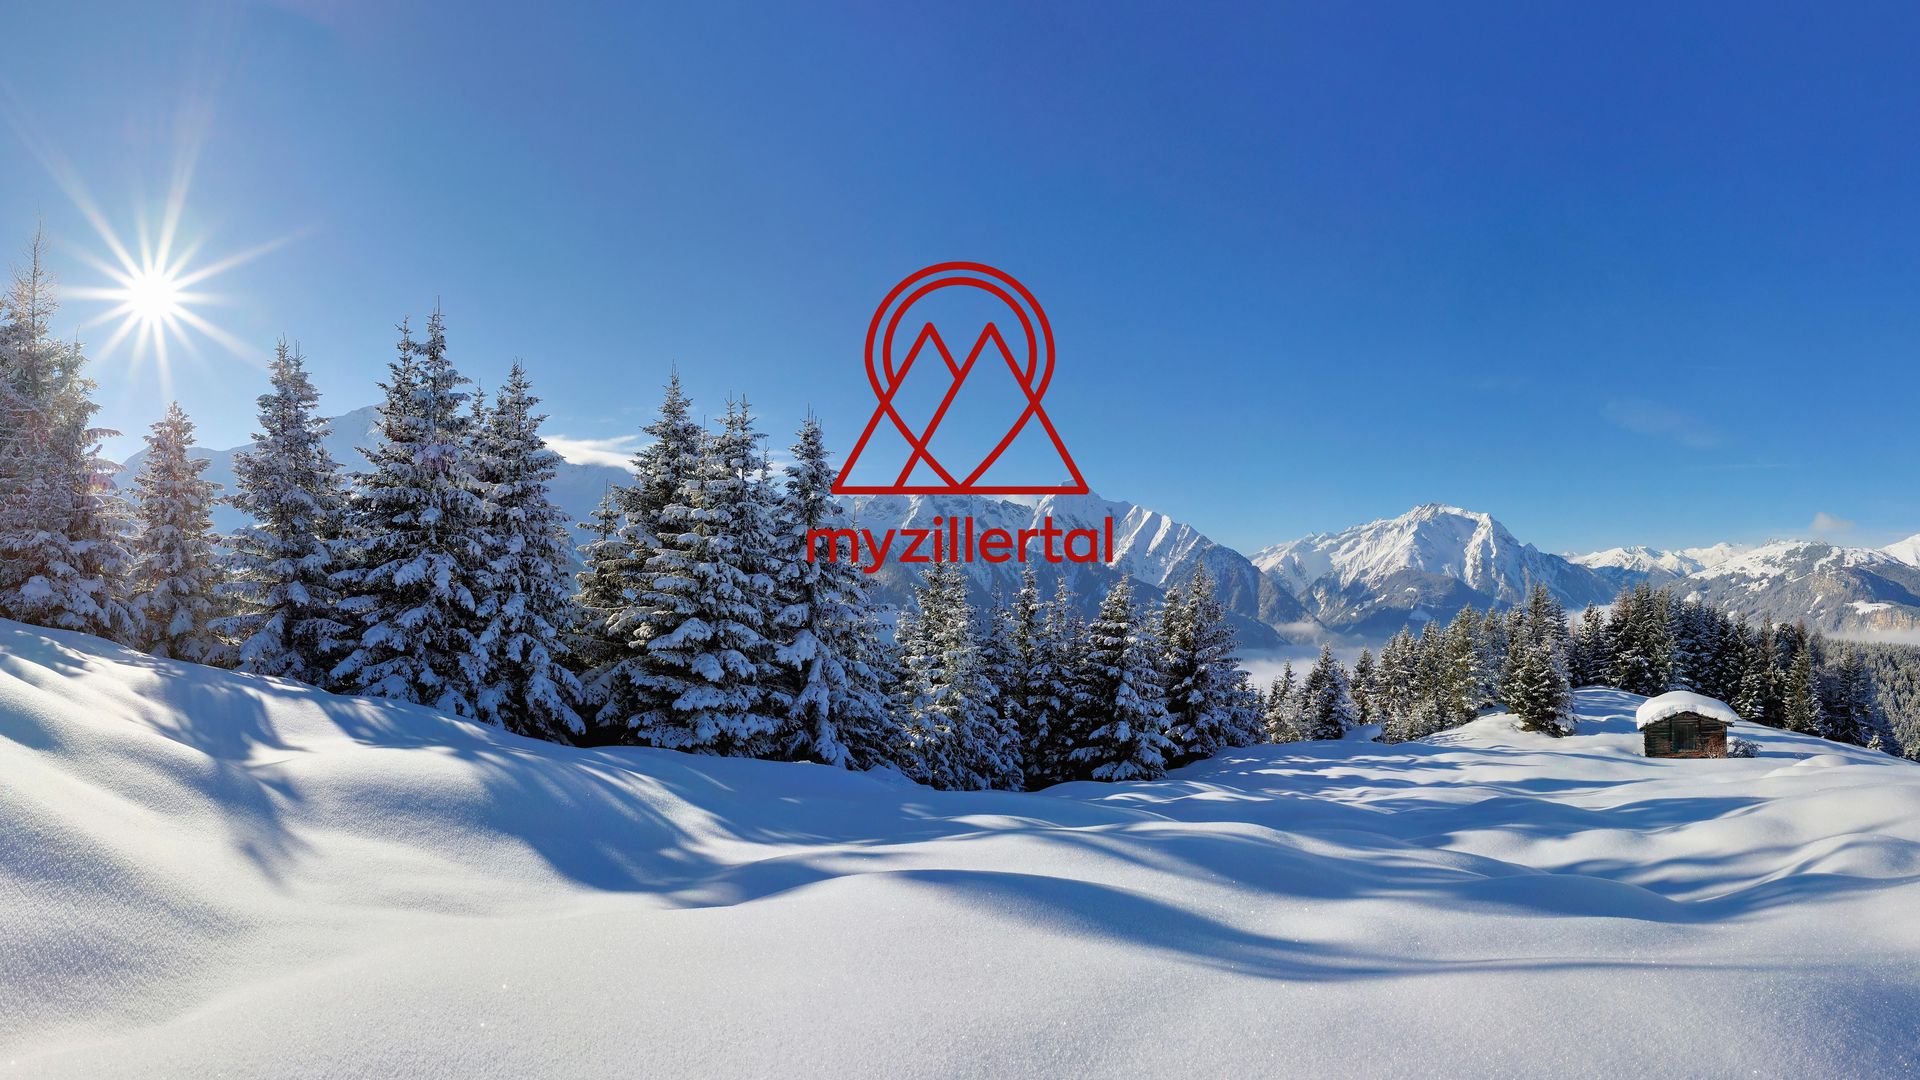 myzillertal.at - the experience platform in Zillertal